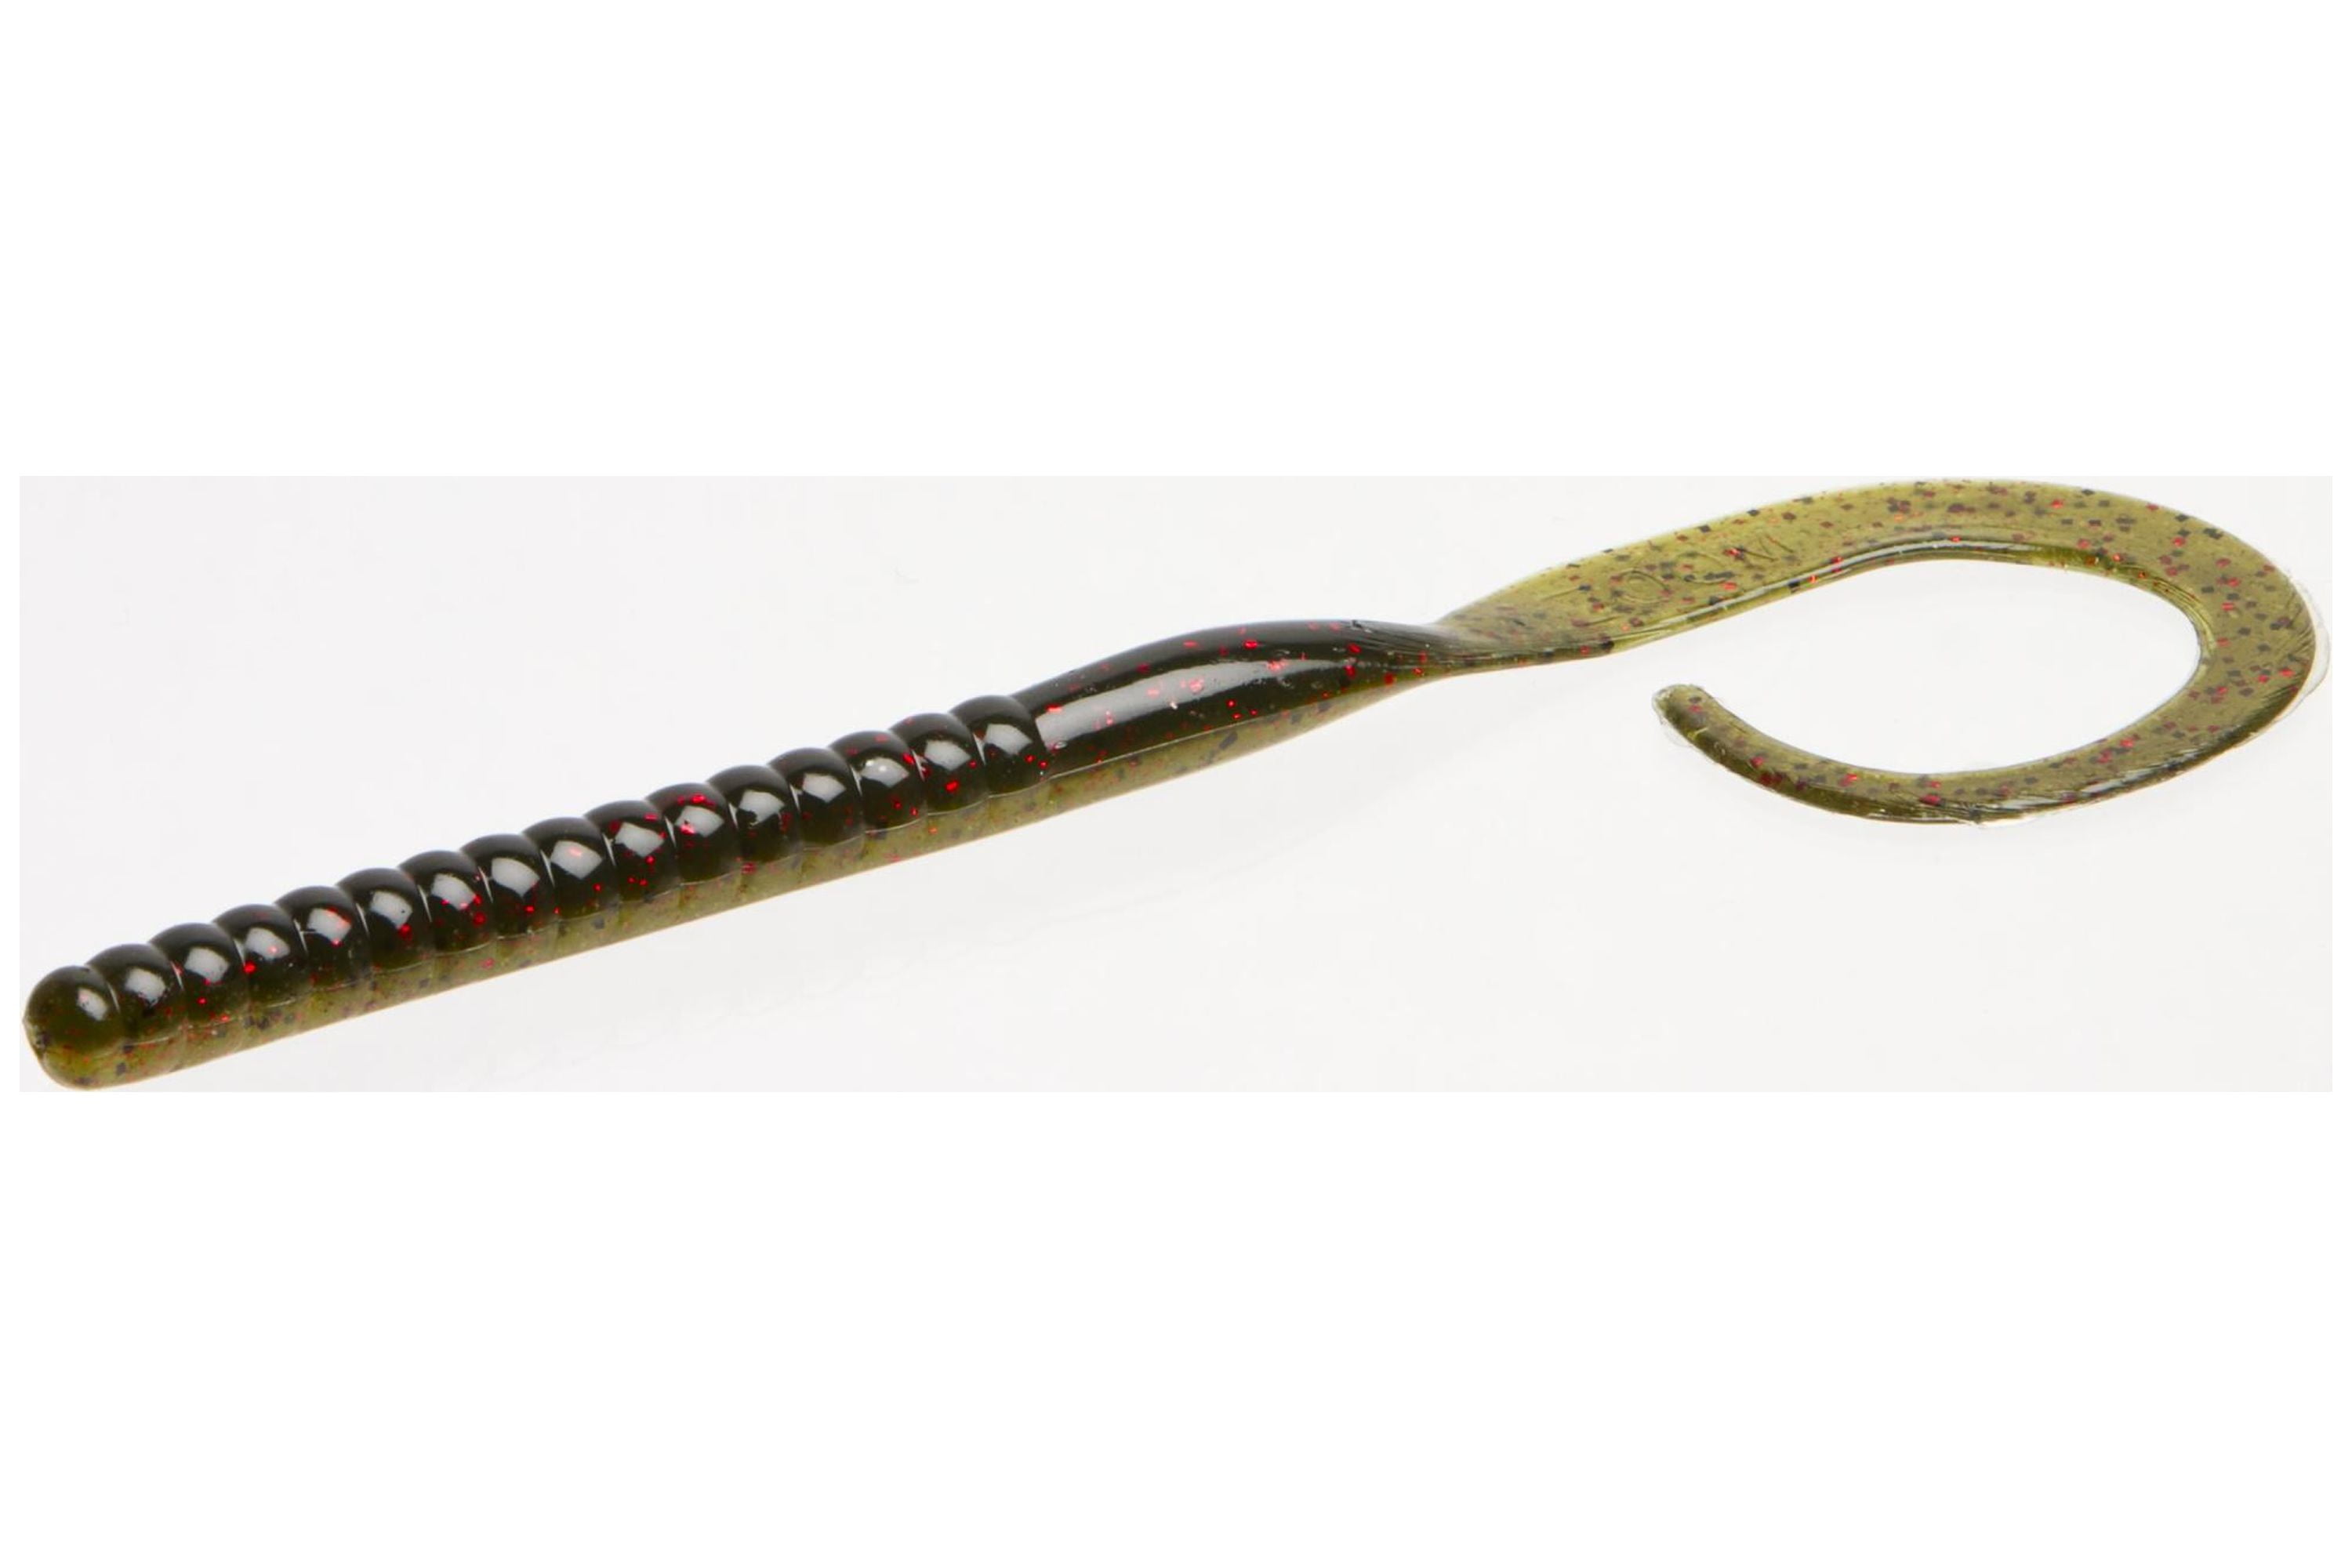 Zoom Ole Monster 10.5 In., Soft Baits 